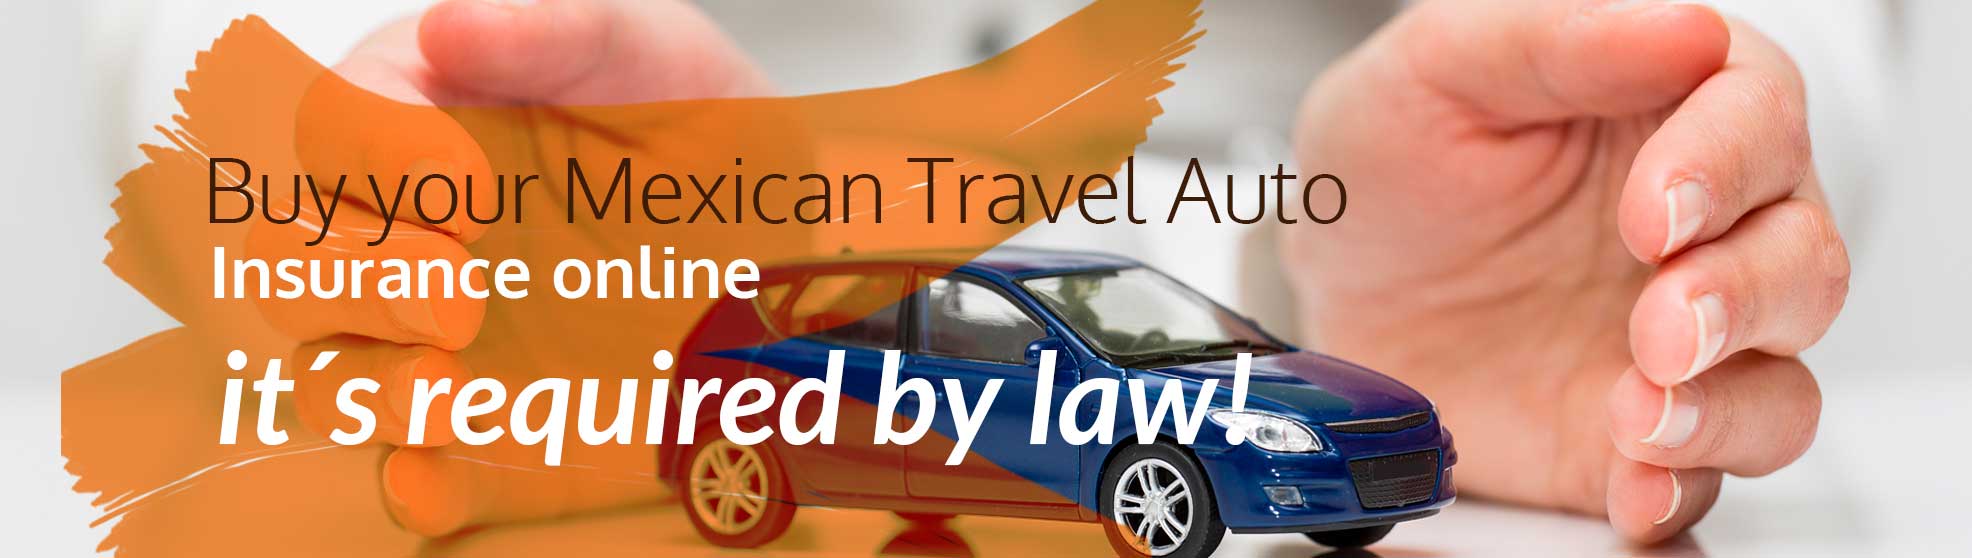 Belize Car Insurance to Travel to Mexico